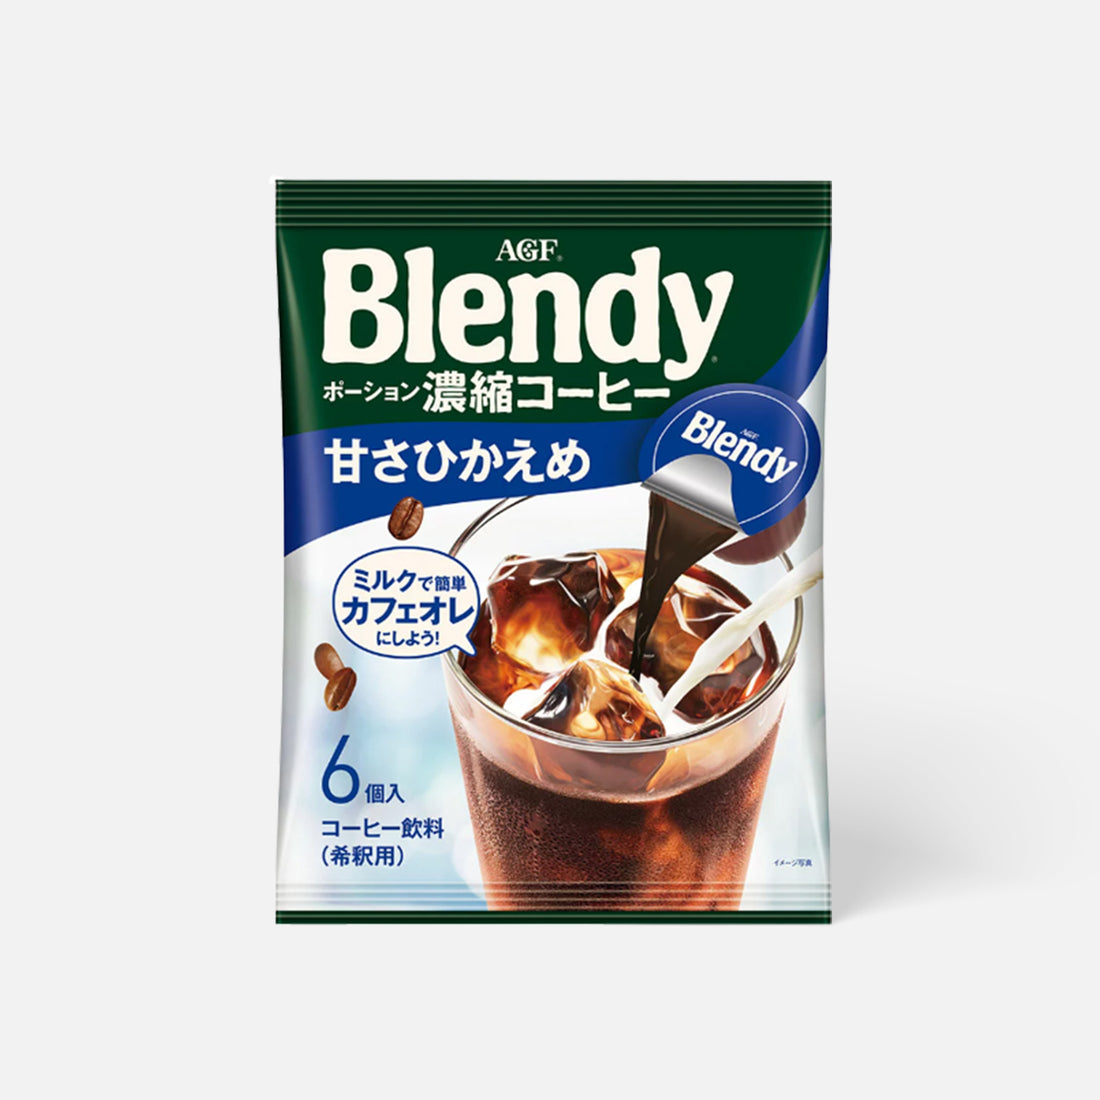 AGF Blendy Portion Concentrated Coffee Less Sugar